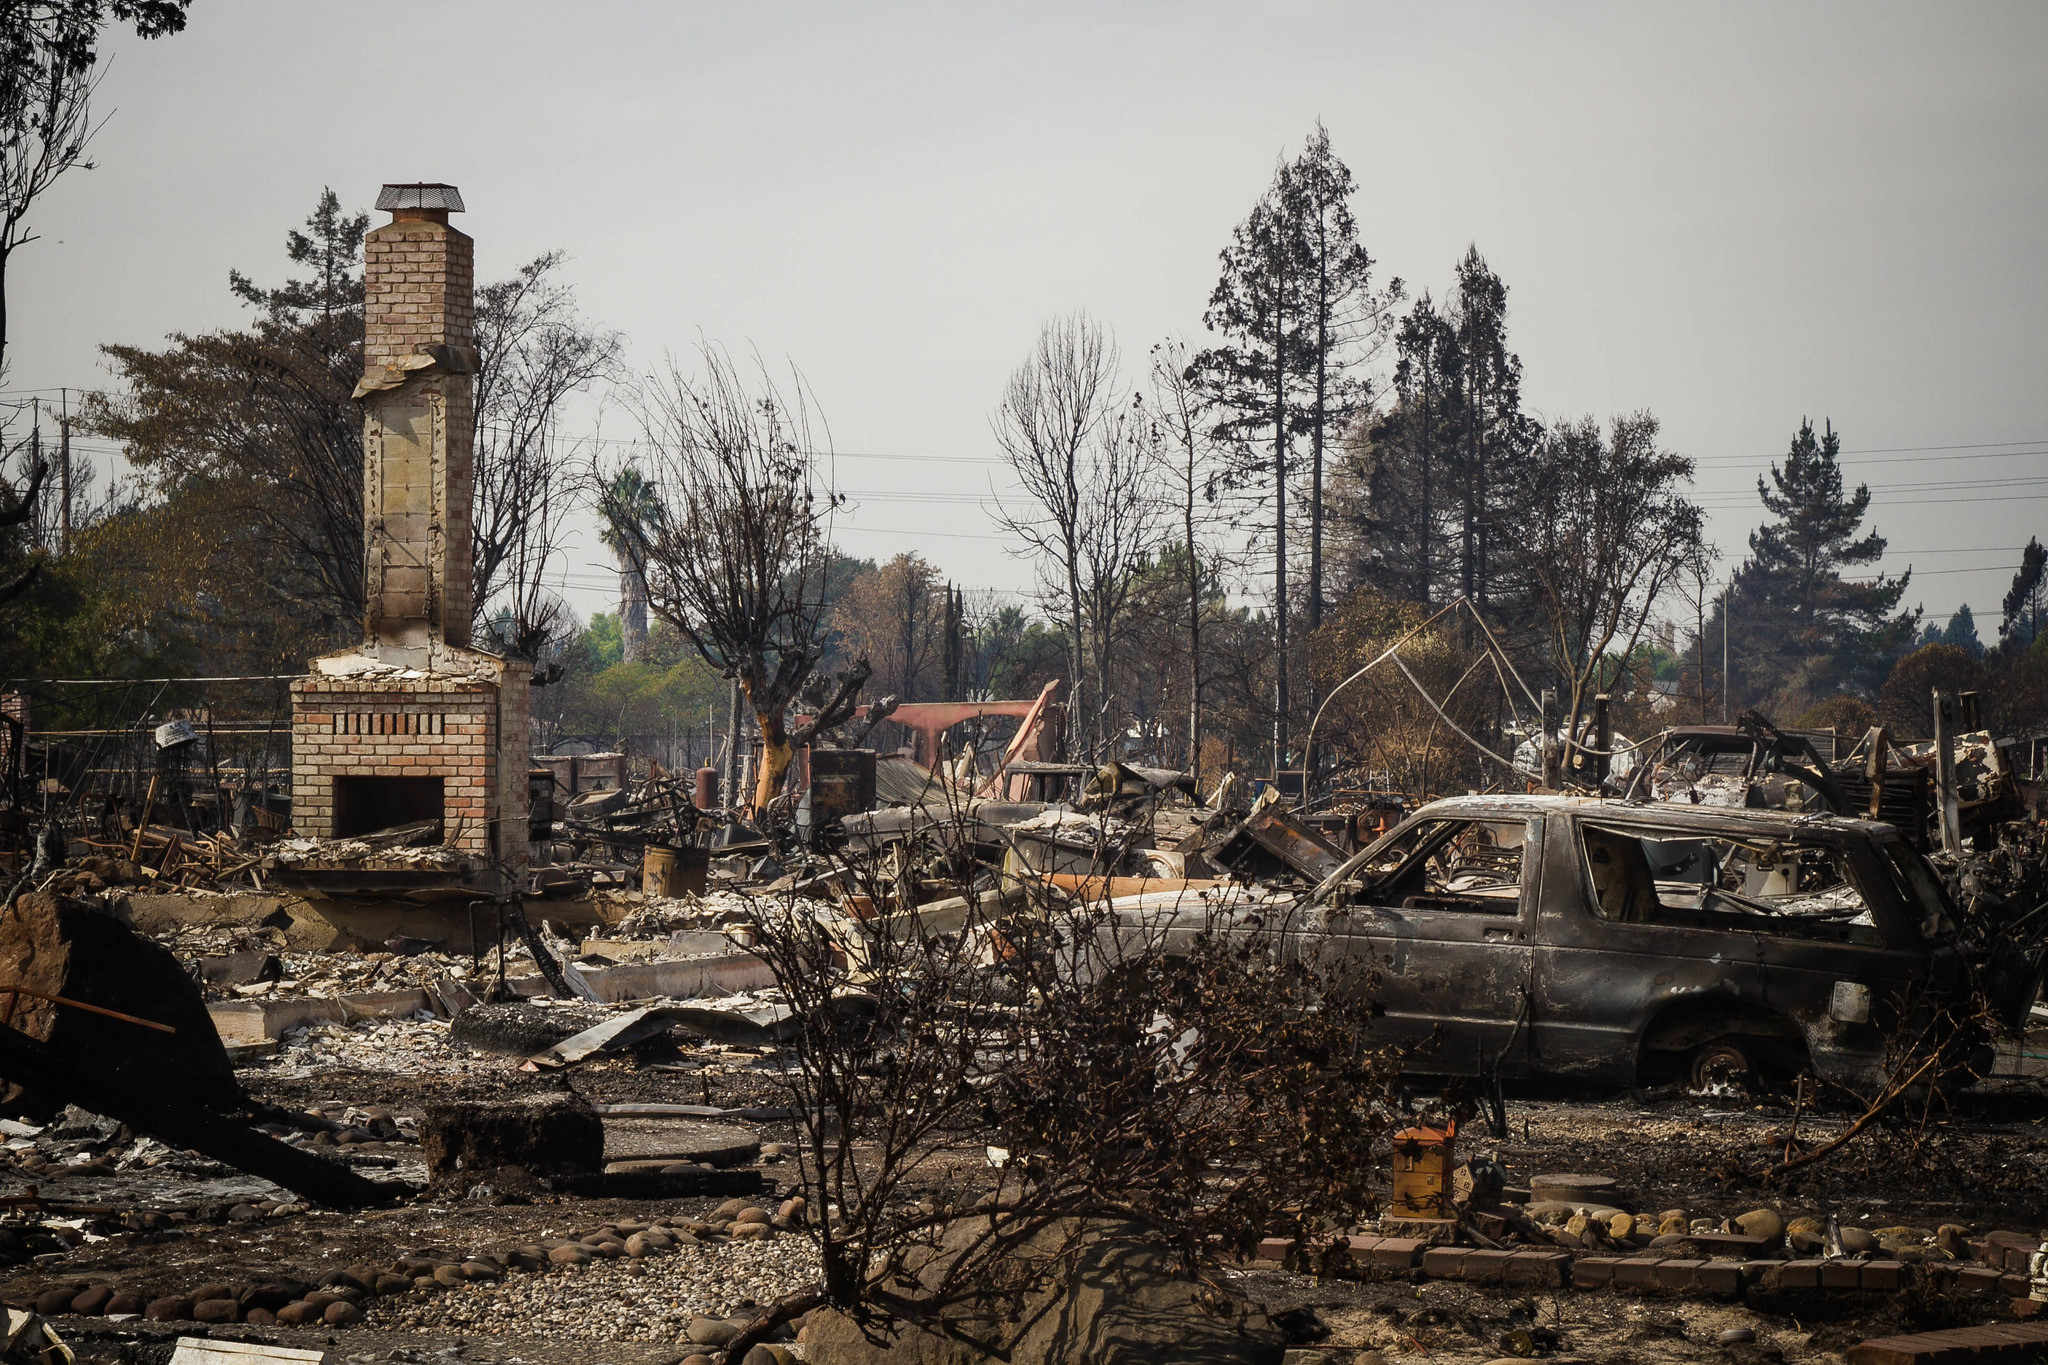 Aftermath of sonoma county's tubbs fire in the coffey park neighborhood of santa rosa, California. Image by the national guard.